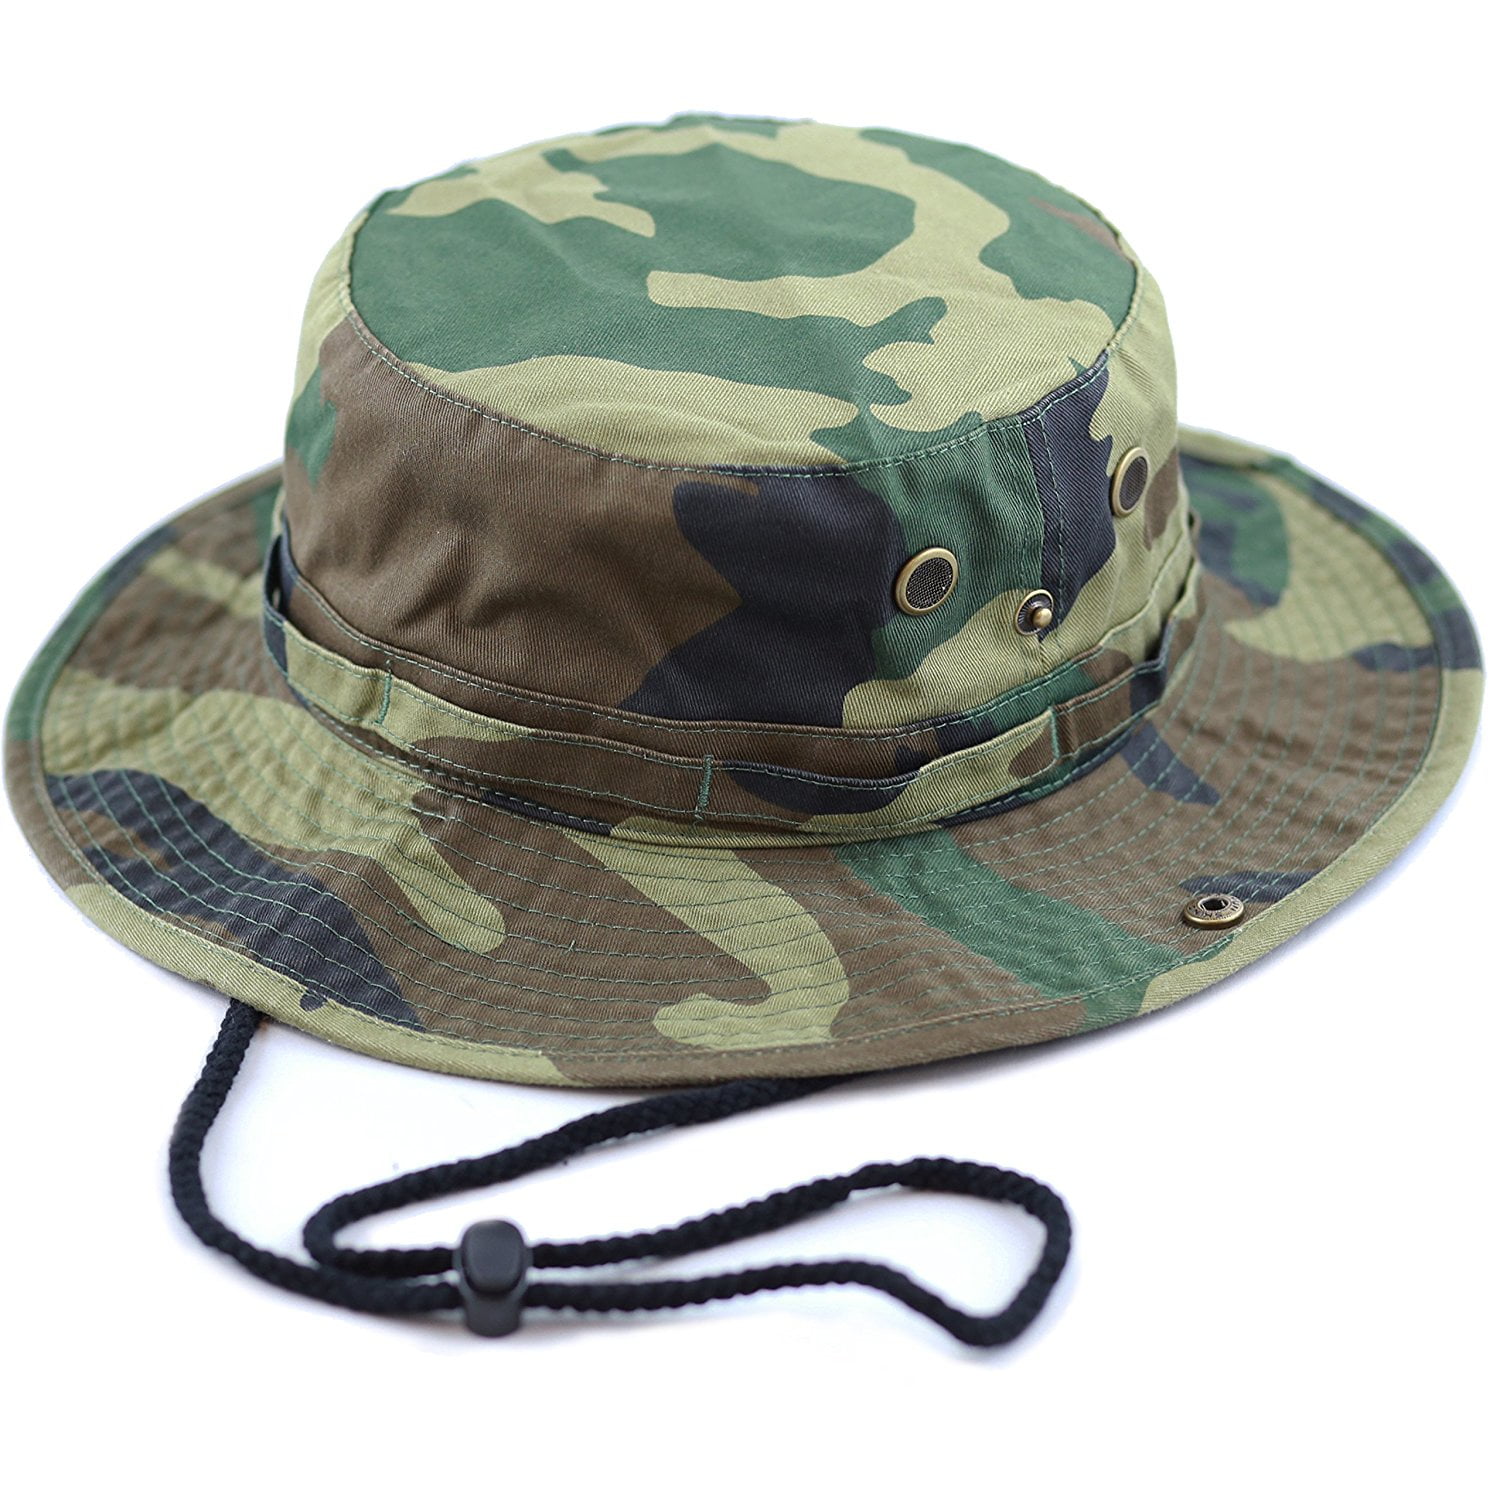 Men Women Boonie hat Cotton Wide Brim Foldable Double-Sided Outdoor ...